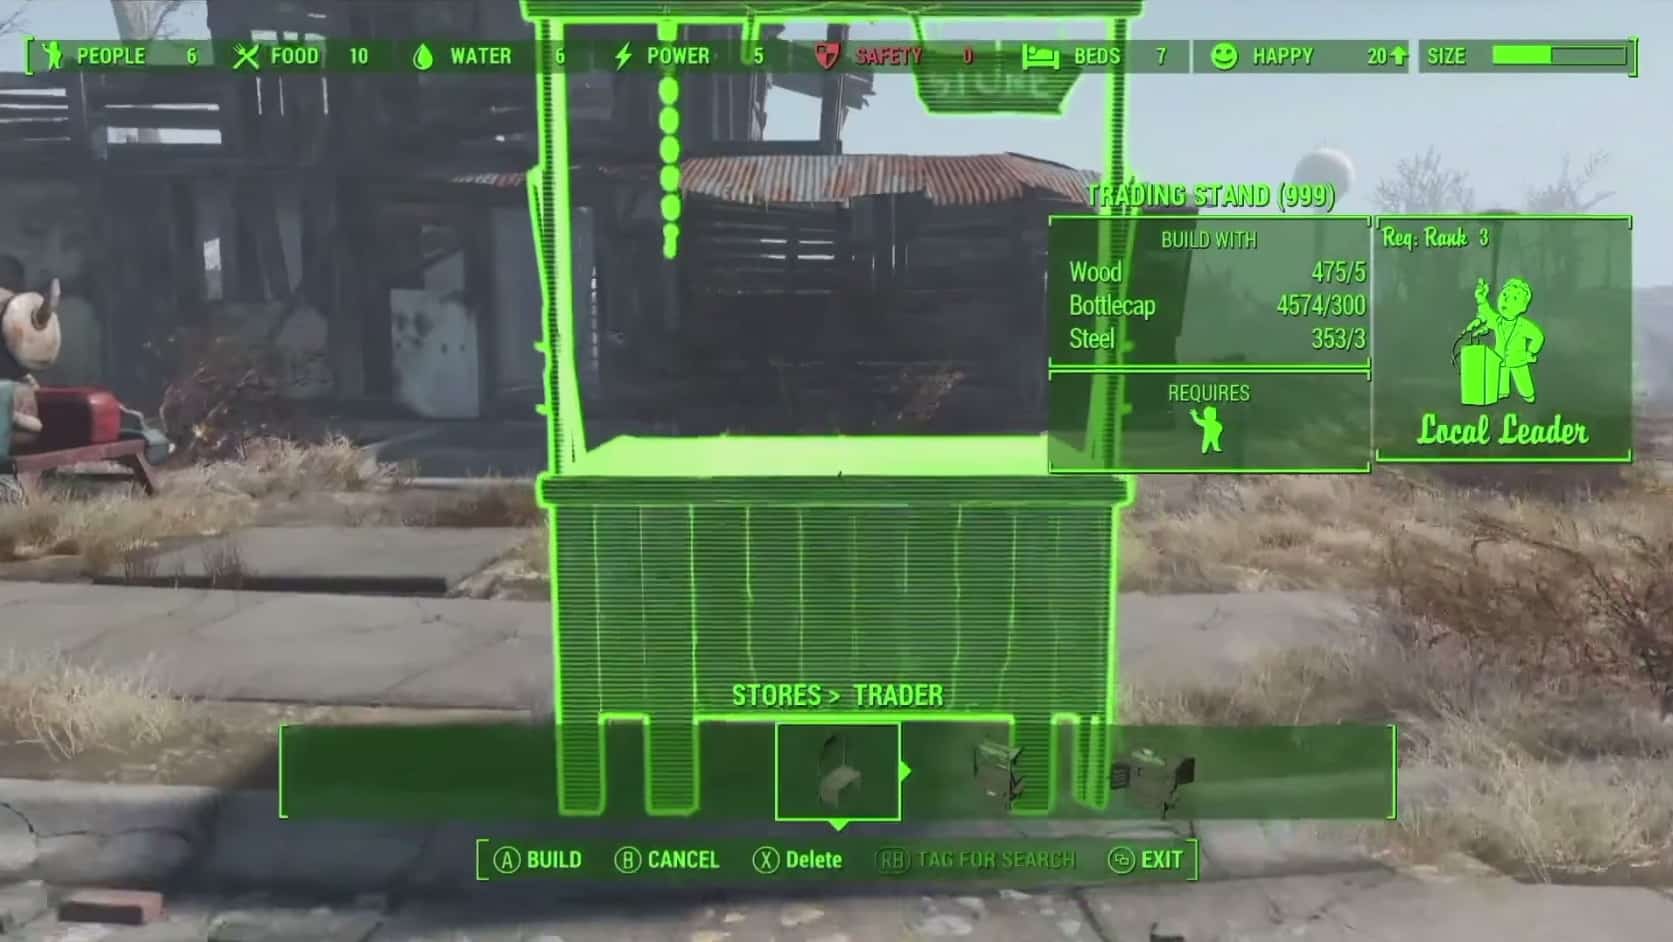 Fallout 4 Trader Store Stand Crafting Xbox One PS4 PC Gameplay Screenshot